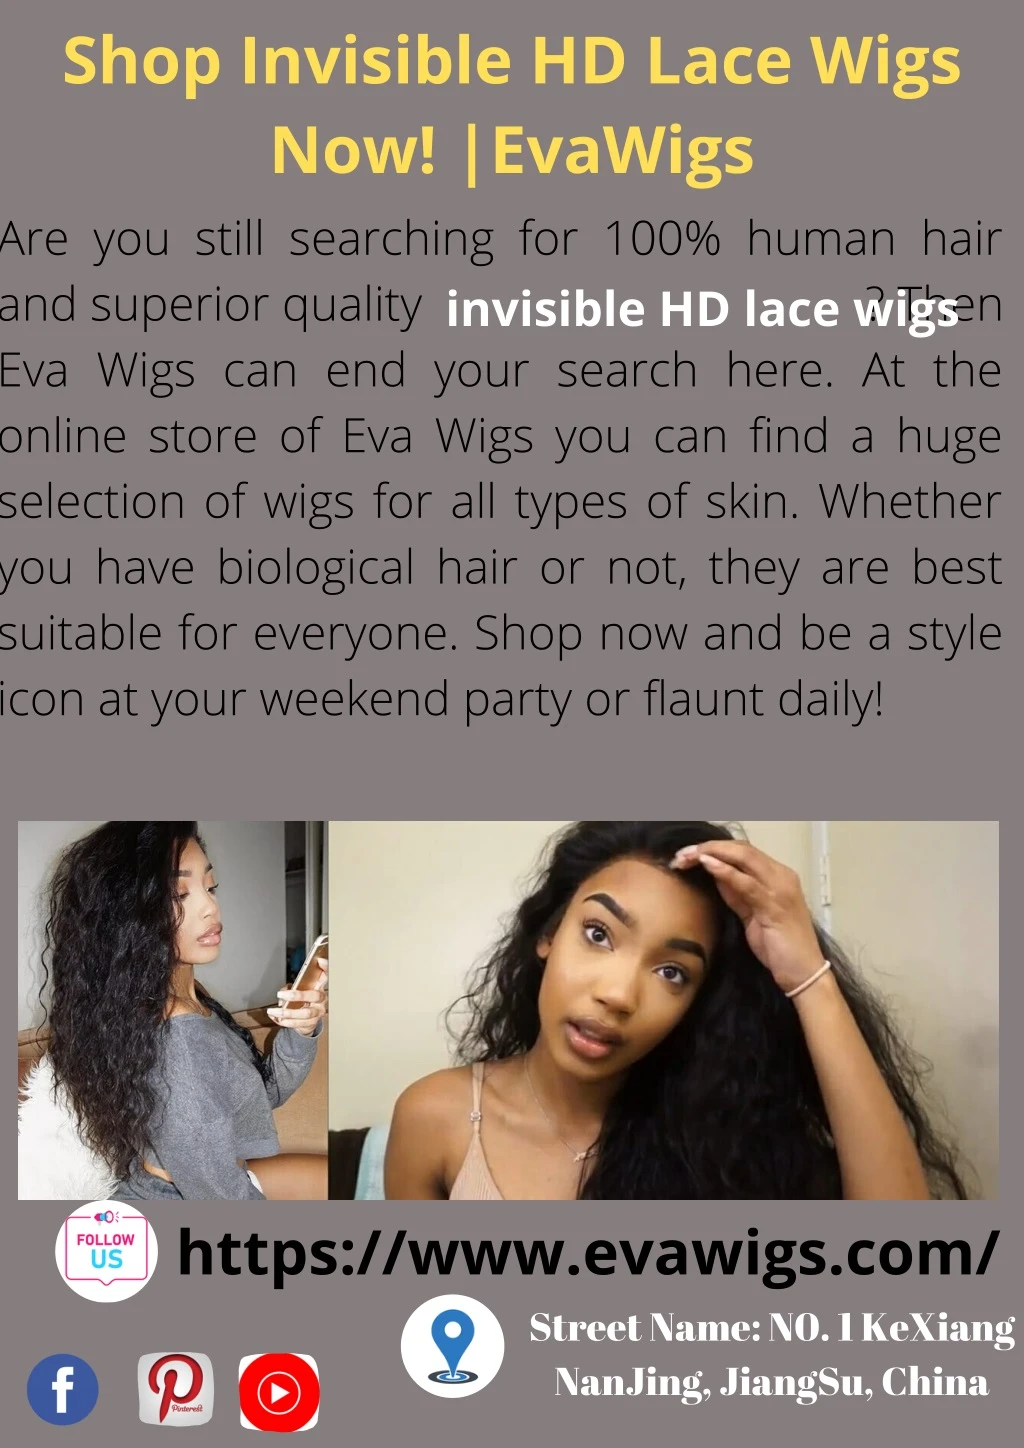 shop invisible hd lace wigs now evawigs